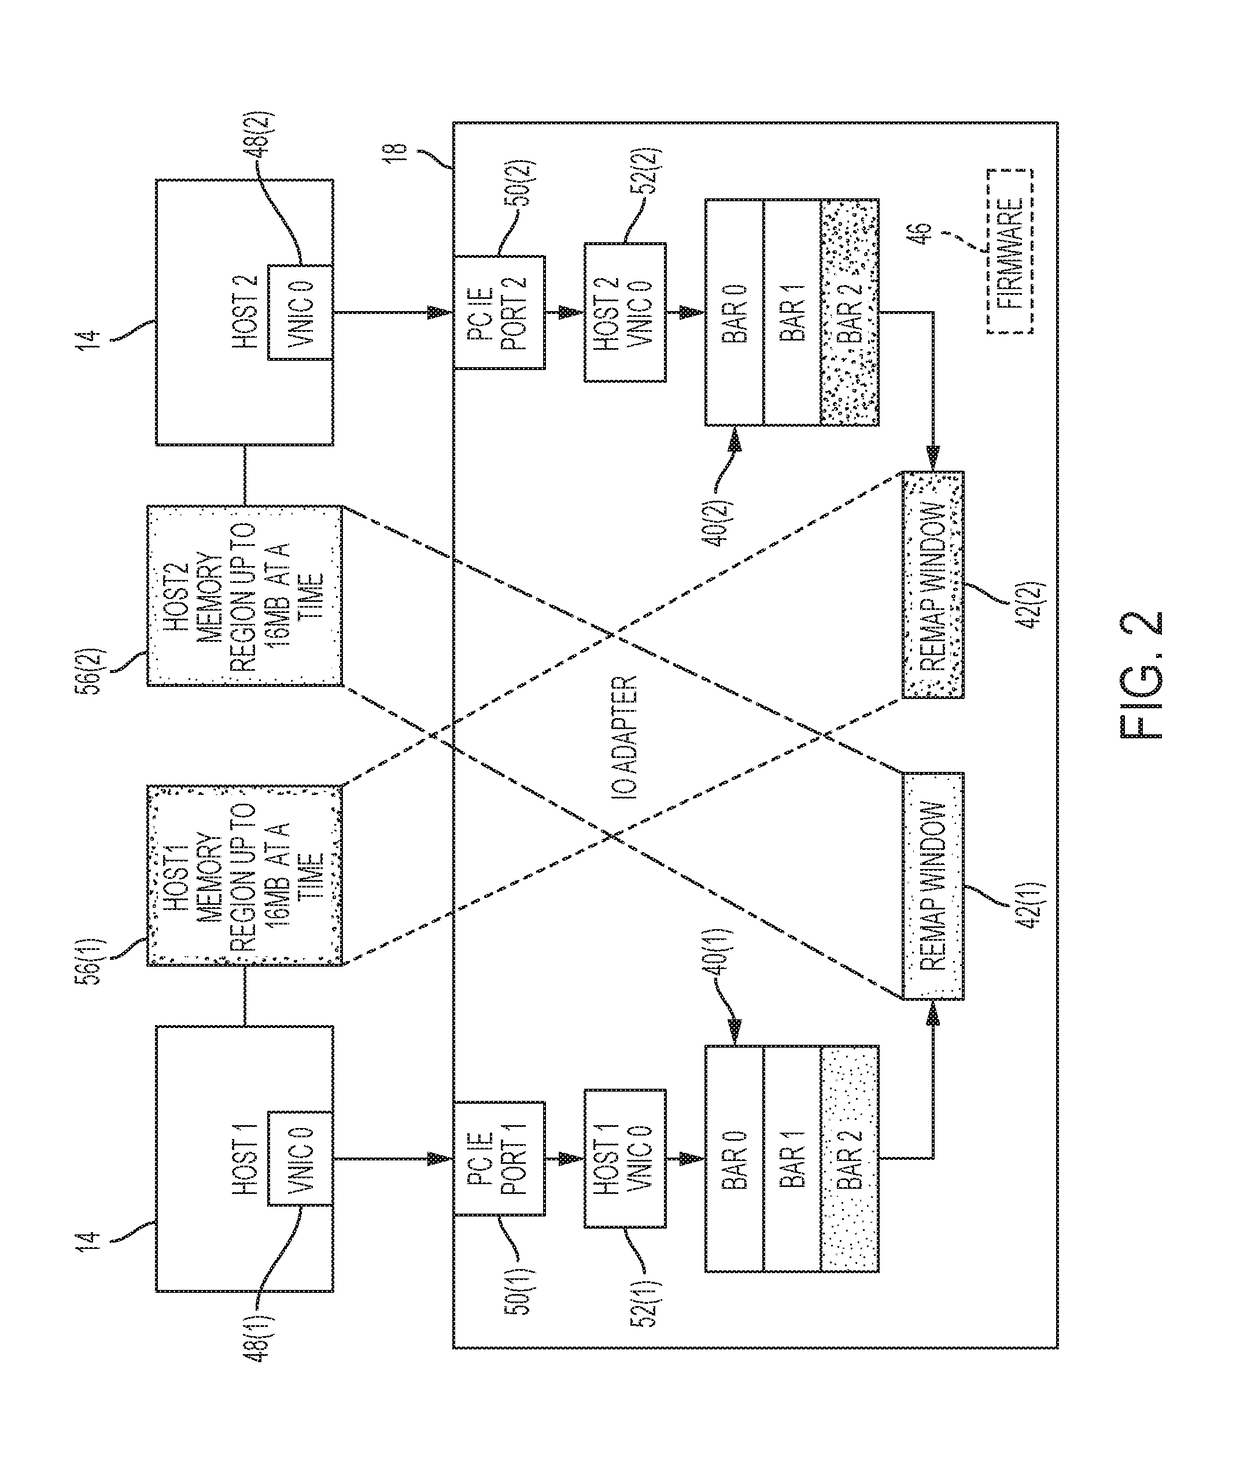 Remote memory access using memory mapped addressing among multiple compute nodes